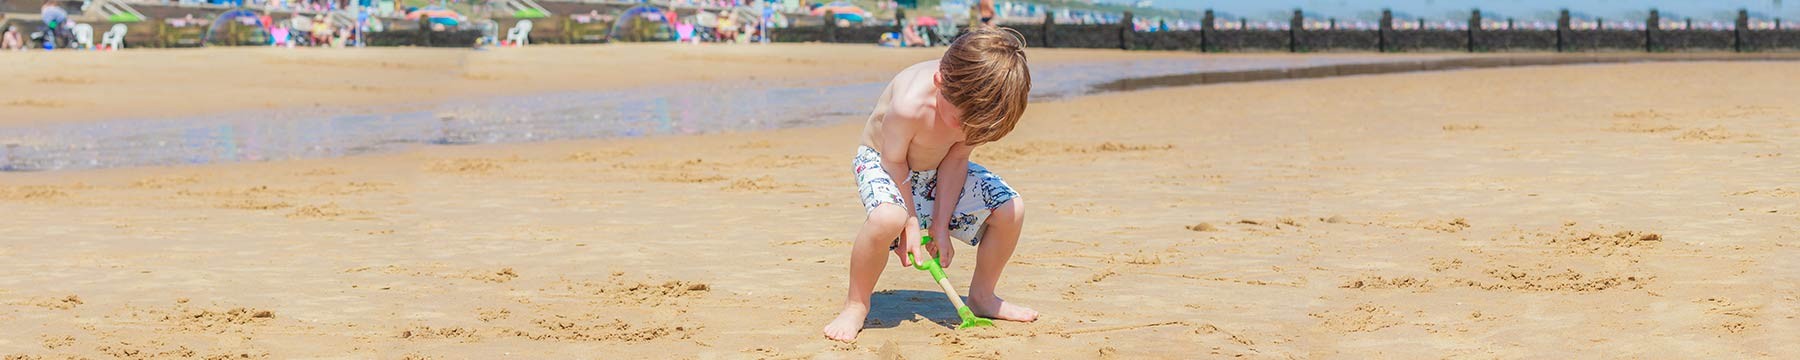 A boy digging in the sand